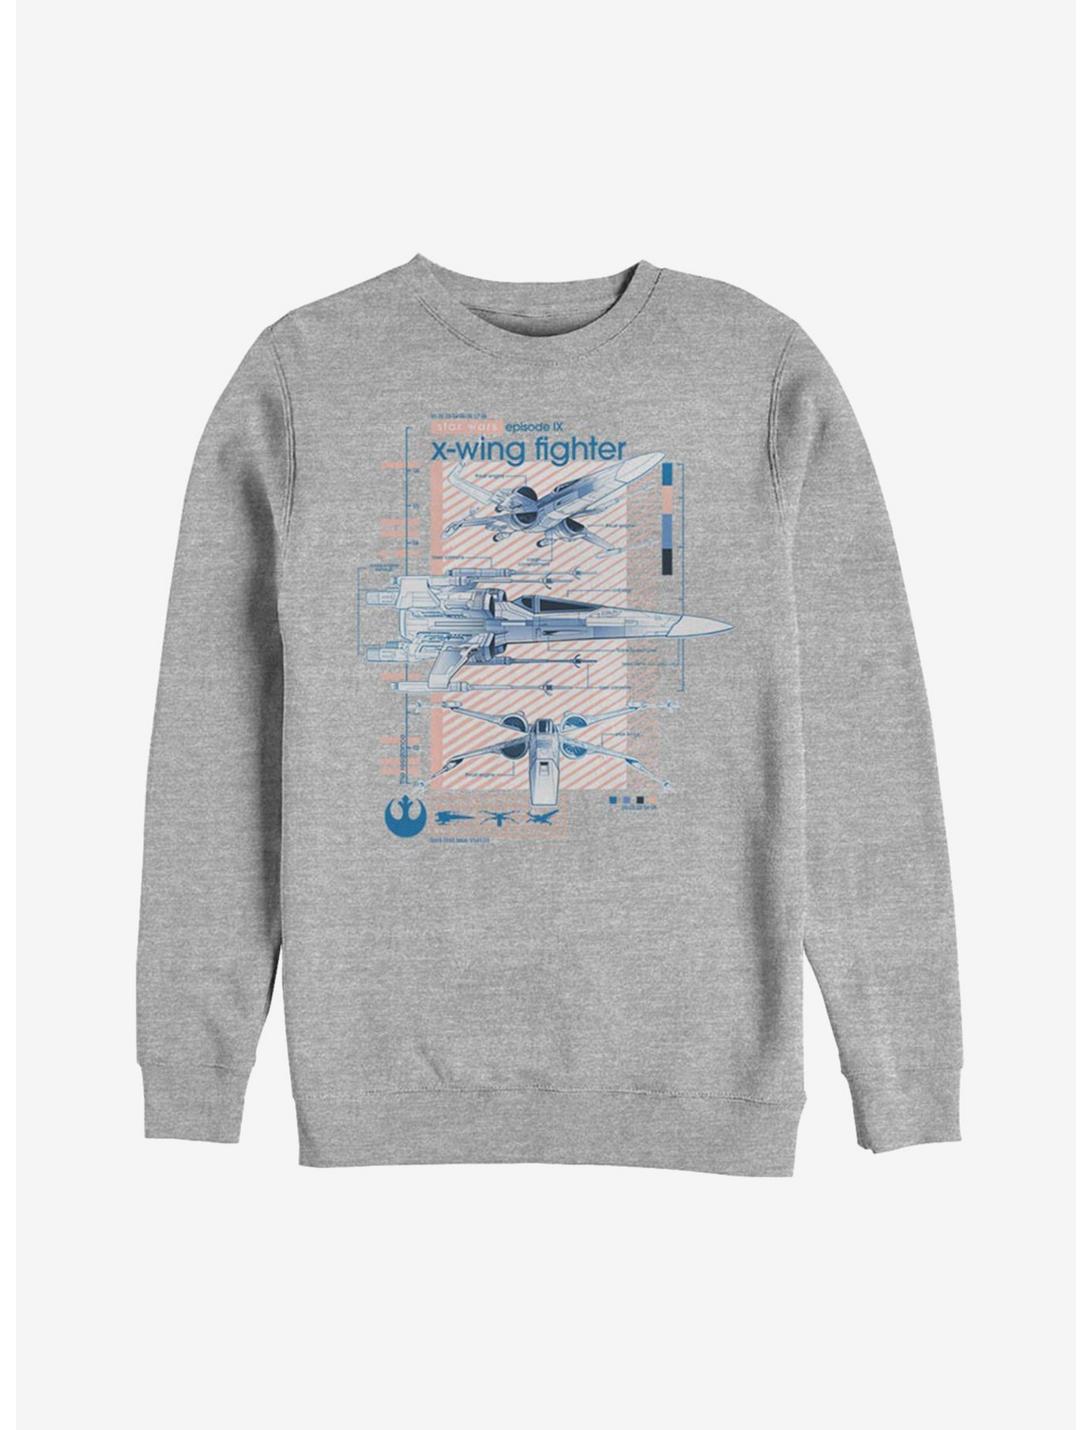 Star Wars Episode IX The Rise Of Skywalker X-Wing Fighters Ninety Sweatshirt, ATH HTR, hi-res